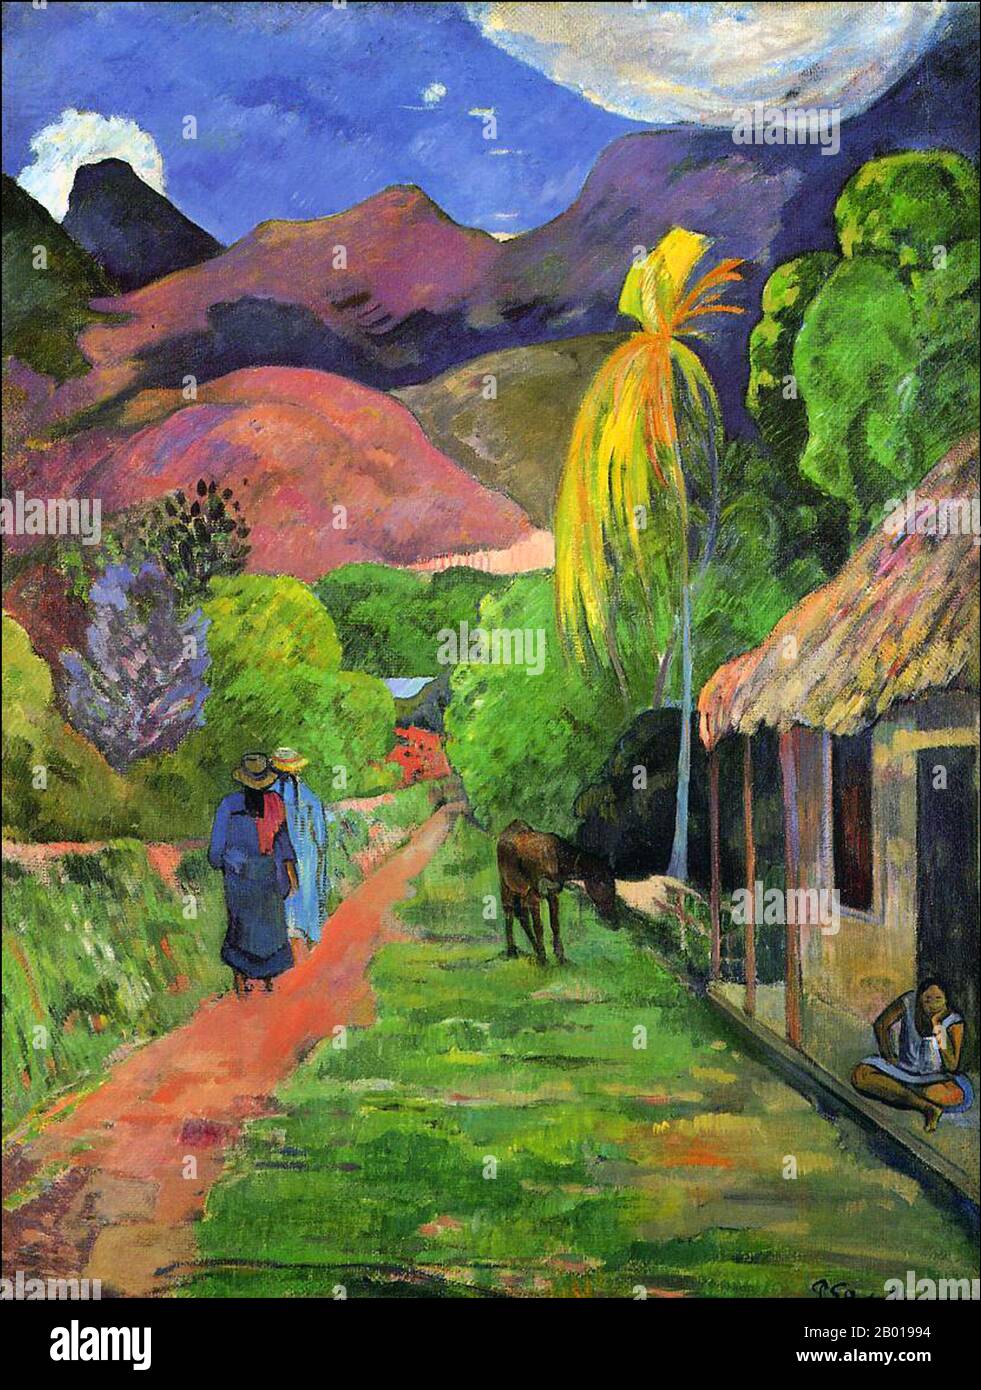 Tahiti: 'Rue de Tahiti' (Street in Tahiti). Oil on canvas painting by Paul Gauguin (7 June 1848 - 8 May 1903), 1891.  Paul Gauguin was born in Paris in 1848 and spent some of his childhood in Peru. He worked as a stockbroker with little success, and suffered from bouts of severe depression. He also painted. In 1891, Gauguin, frustrated by lack of recognition at home and financially destitute, sailed to the tropics to escape European civilization and 'everything that is artificial and conventional'. His time there was the subject of much interest both then and in modern times. Stock Photo